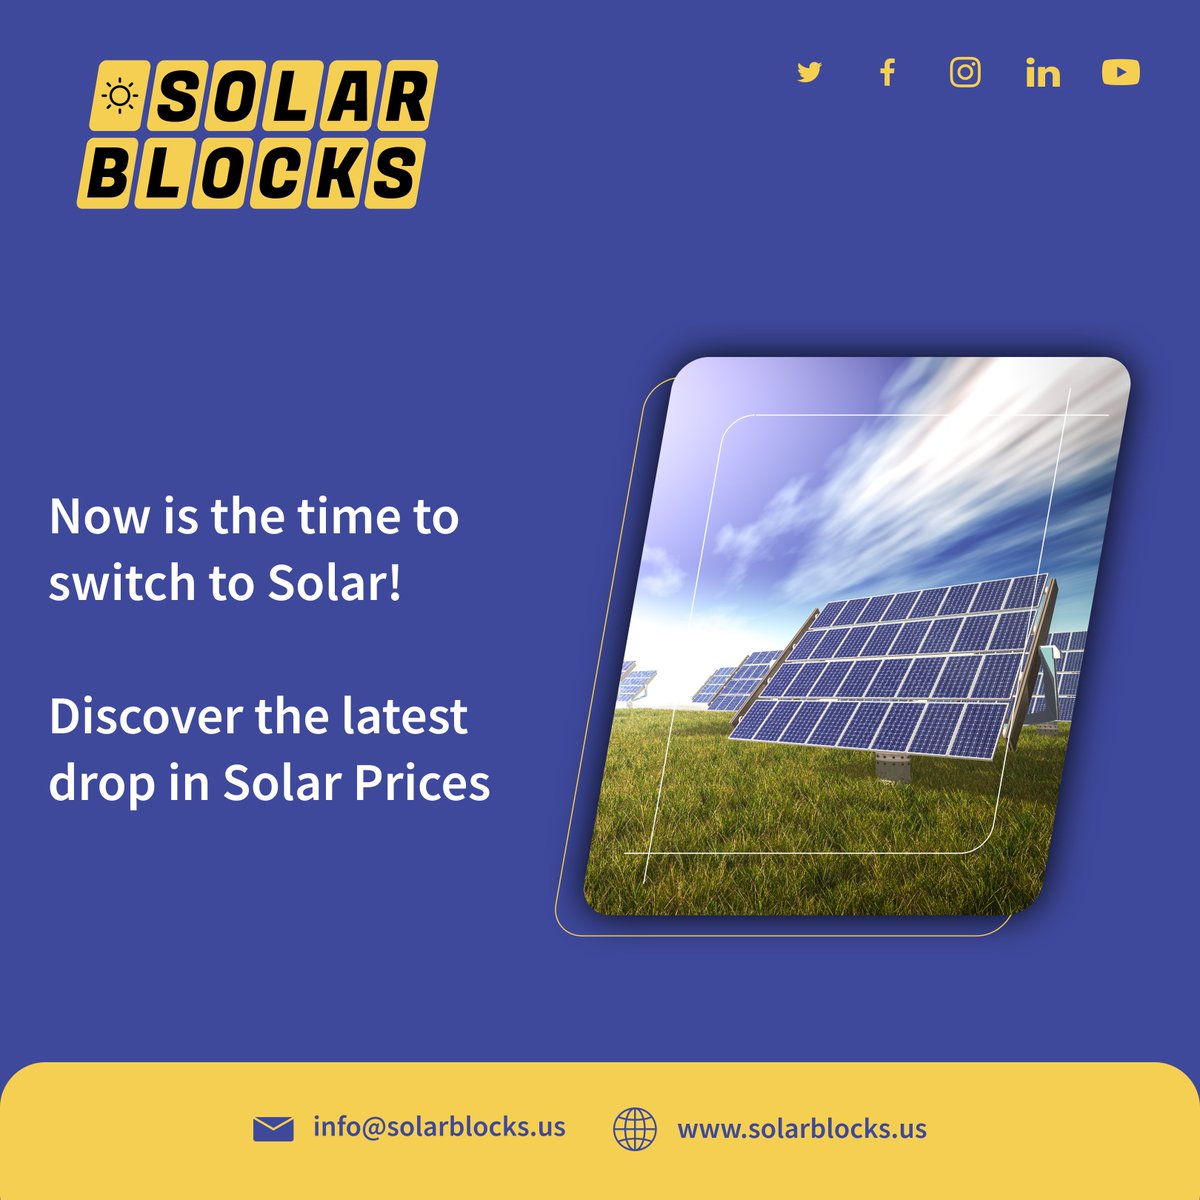 Exciting news in solar: 

Prices dropped 3.5% to $2.80/W, with 61% of quotes now including storage. California's NEM 3.0 sparked interest in storage. Embrace clean energy for a sustainable future! 
#Solarblocks #Solar #Renewables #EnergyStorage #solarpanels #solarsystems #nyc #us